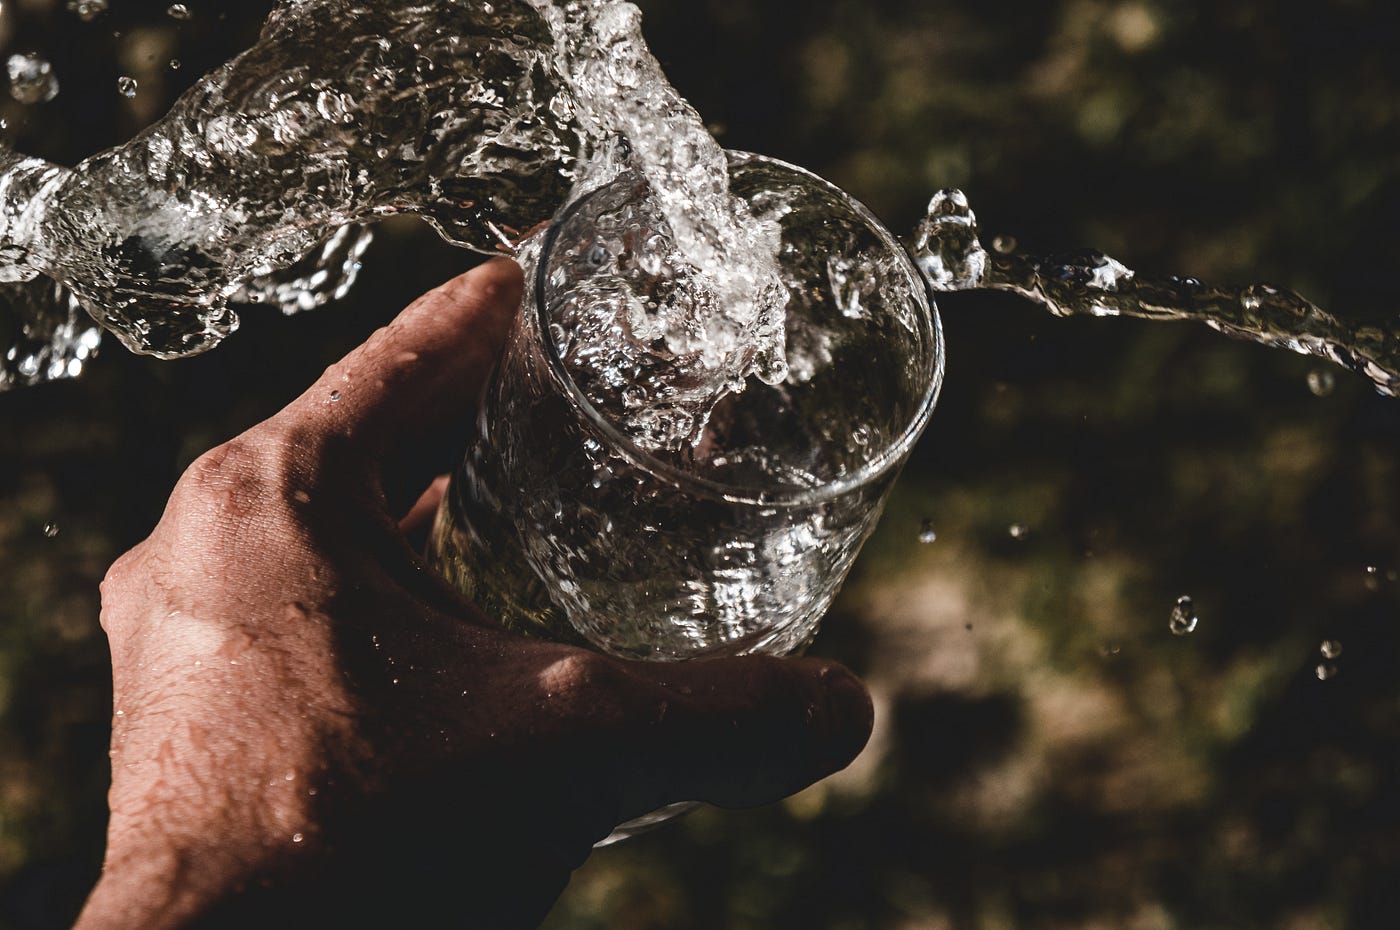 A hand extends from the bottom of the image to shake a glass of water. The water is splashing out. It takes 18 to 254 days to form a new habit. The study also concluded that, on average, it takes 66 days for a new behavior to become automatic.